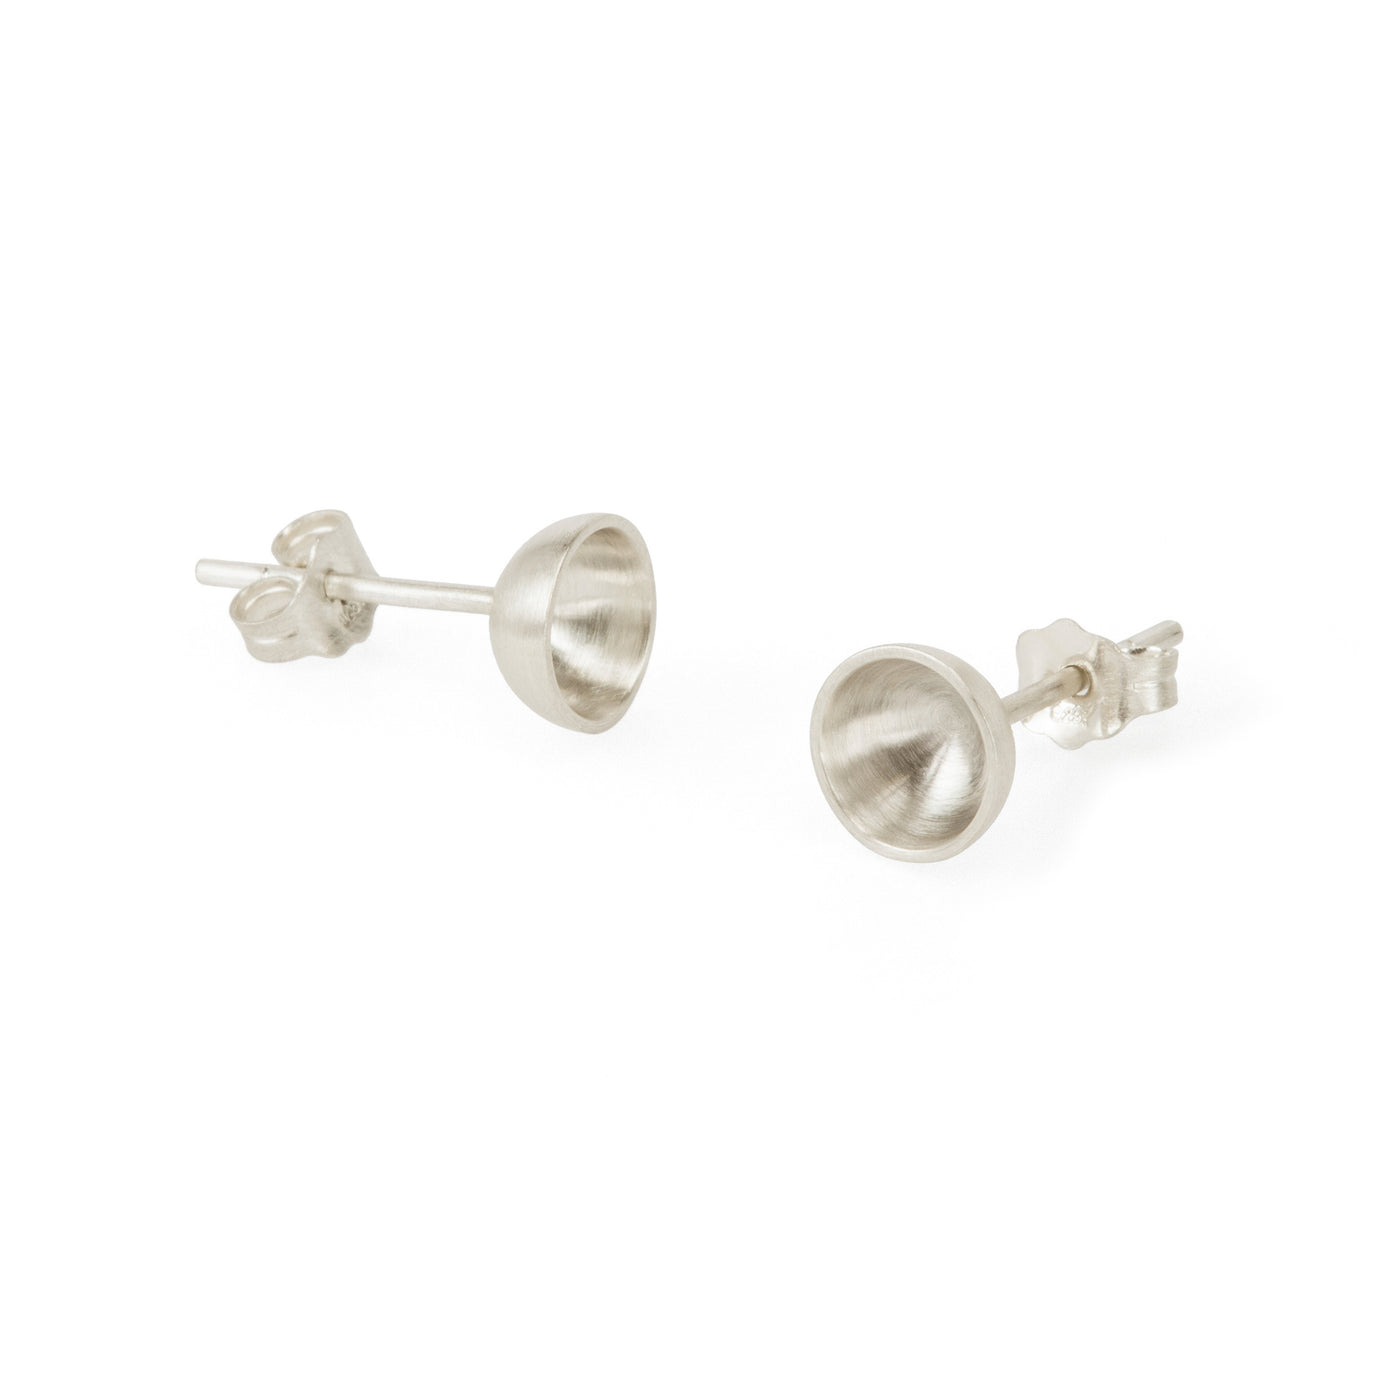 Ethical silver earrings. These minimalist Vessel Studs are handmade in Cape Town in recycled silver from e-waste.